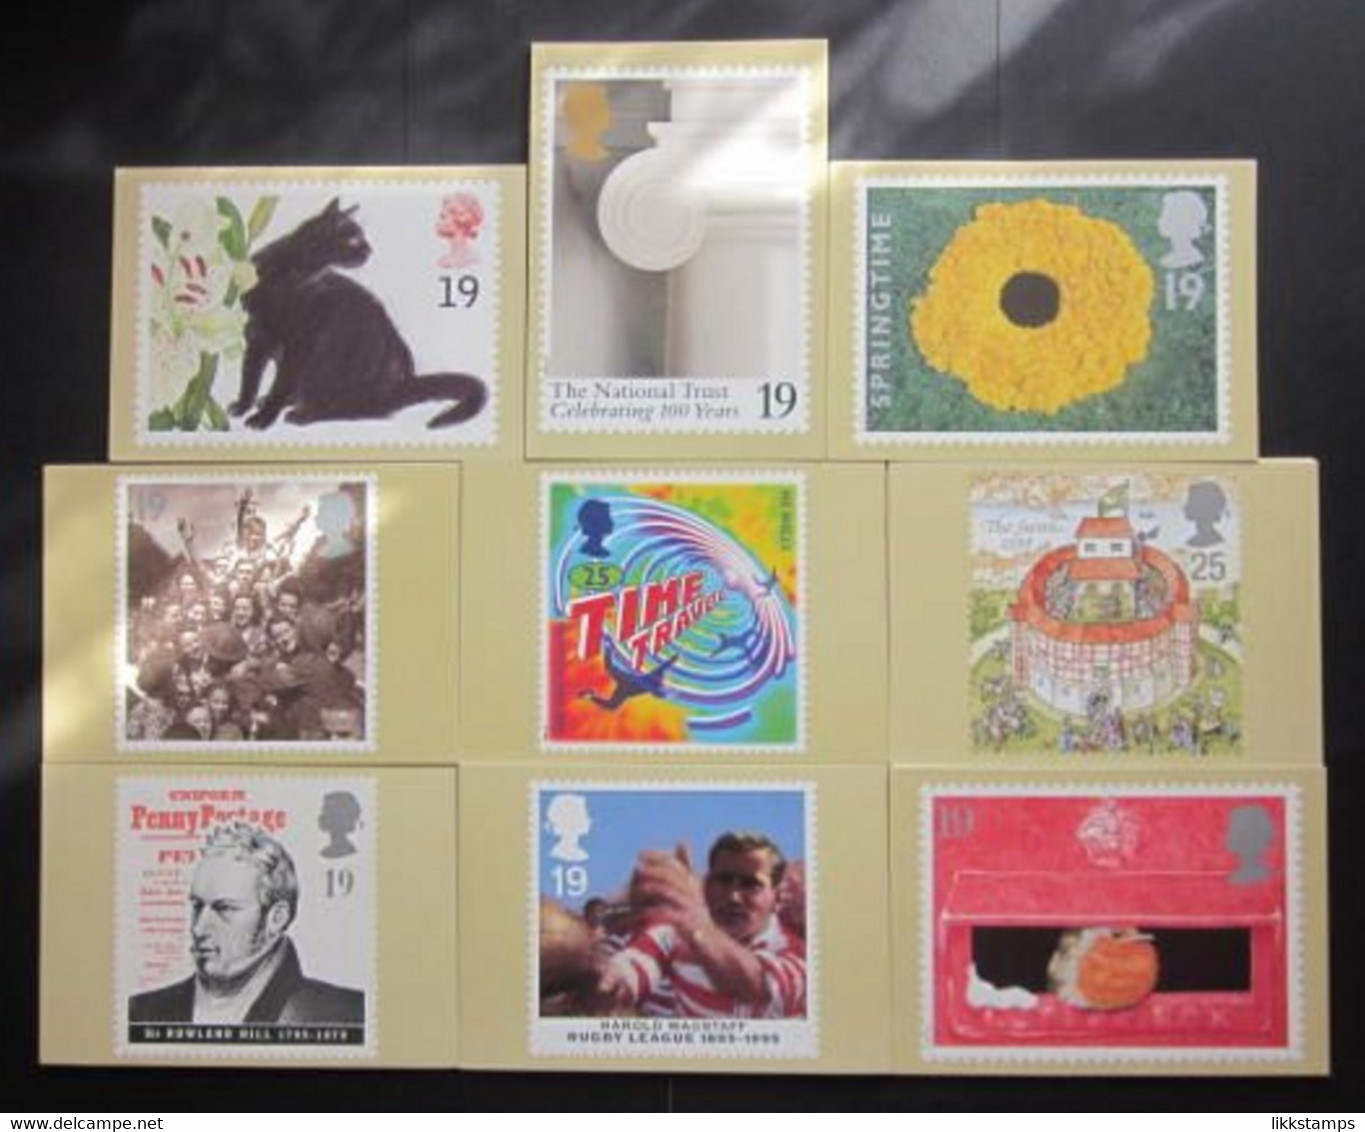 1995 THE COMPLETE YEAR SET OF COMMEMORATIVE P.H.Q. CARDS UNUSED. ISSUE Nos. 167 To 175 (B) #01195 - Cartes PHQ